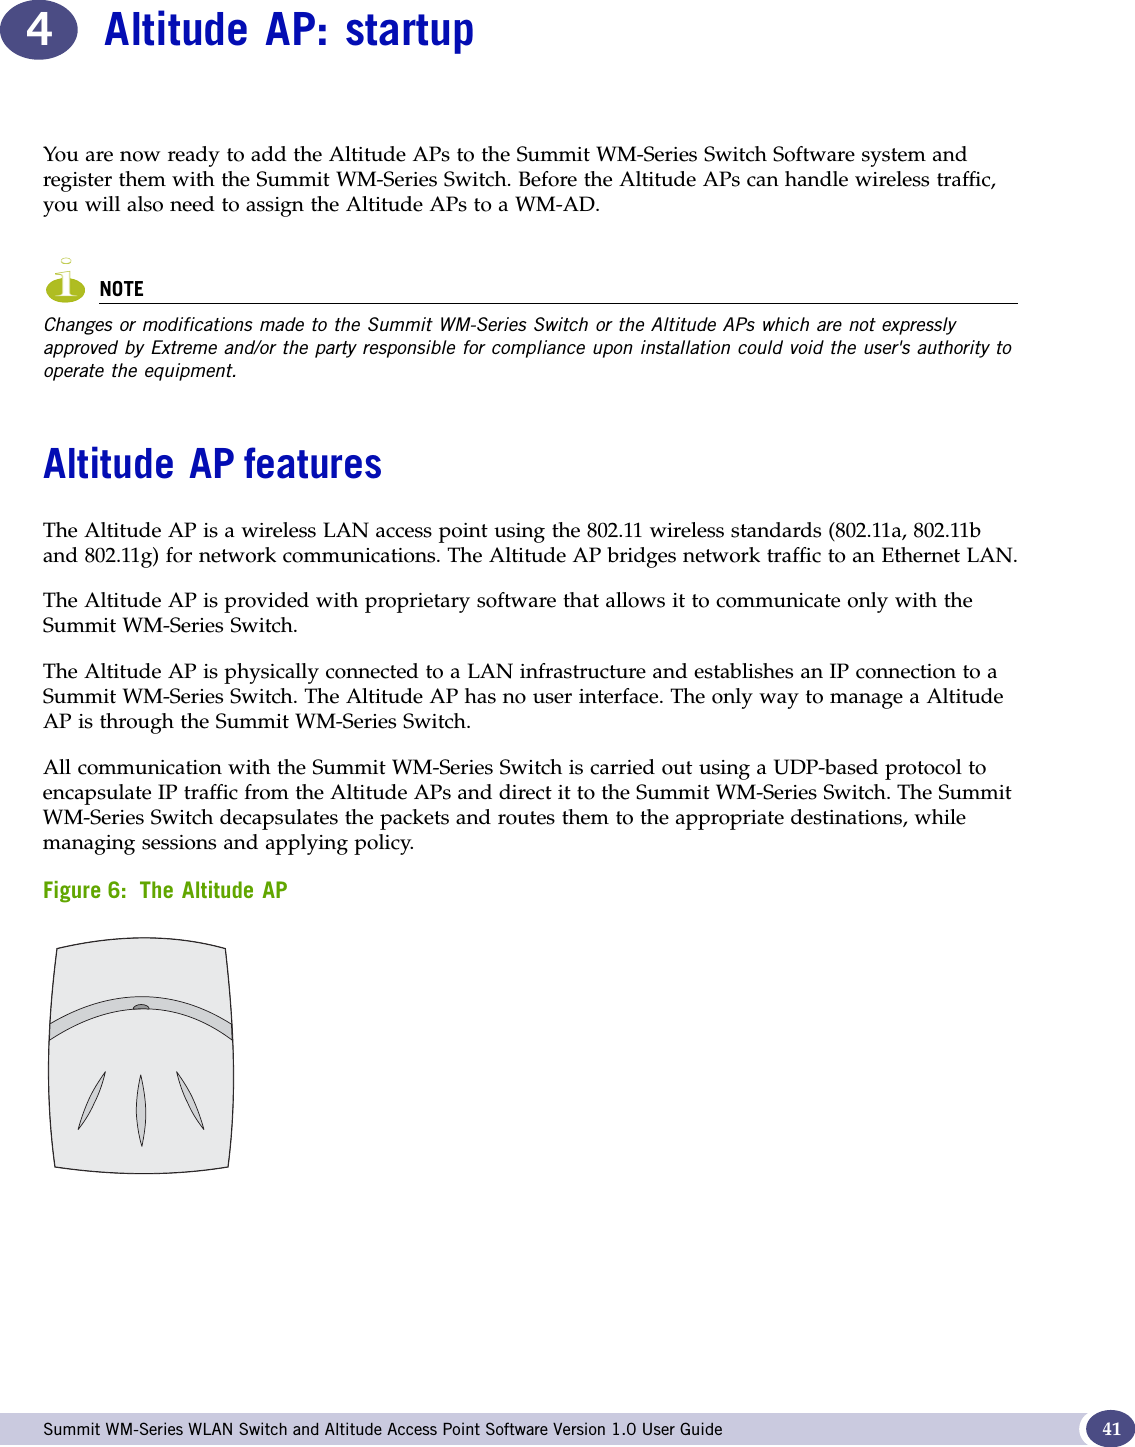  Summit WM-Series WLAN Switch and Altitude Access Point Software Version 1.0 User Guide 414Altitude AP: startupYou are now ready to add the Altitude APs to the Summit WM-Series Switch Software system and register them with the Summit WM-Series Switch. Before the Altitude APs can handle wireless traffic, you will also need to assign the Altitude APs to a WM-AD.NOTEChanges or modifications made to the Summit WM-Series Switch or the Altitude APs which are not expressly approved by Extreme and/or the party responsible for compliance upon installation could void the user&apos;s authority to operate the equipment.Altitude AP featuresThe Altitude AP is a wireless LAN access point using the 802.11 wireless standards (802.11a, 802.11b and 802.11g) for network communications. The Altitude AP bridges network traffic to an Ethernet LAN.The Altitude AP is provided with proprietary software that allows it to communicate only with the Summit WM-Series Switch. The Altitude AP is physically connected to a LAN infrastructure and establishes an IP connection to a Summit WM-Series Switch. The Altitude AP has no user interface. The only way to manage a Altitude AP is through the Summit WM-Series Switch. All communication with the Summit WM-Series Switch is carried out using a UDP-based protocol to encapsulate IP traffic from the Altitude APs and direct it to the Summit WM-Series Switch. The Summit WM-Series Switch decapsulates the packets and routes them to the appropriate destinations, while managing sessions and applying policy. Figure 6: The Altitude AP